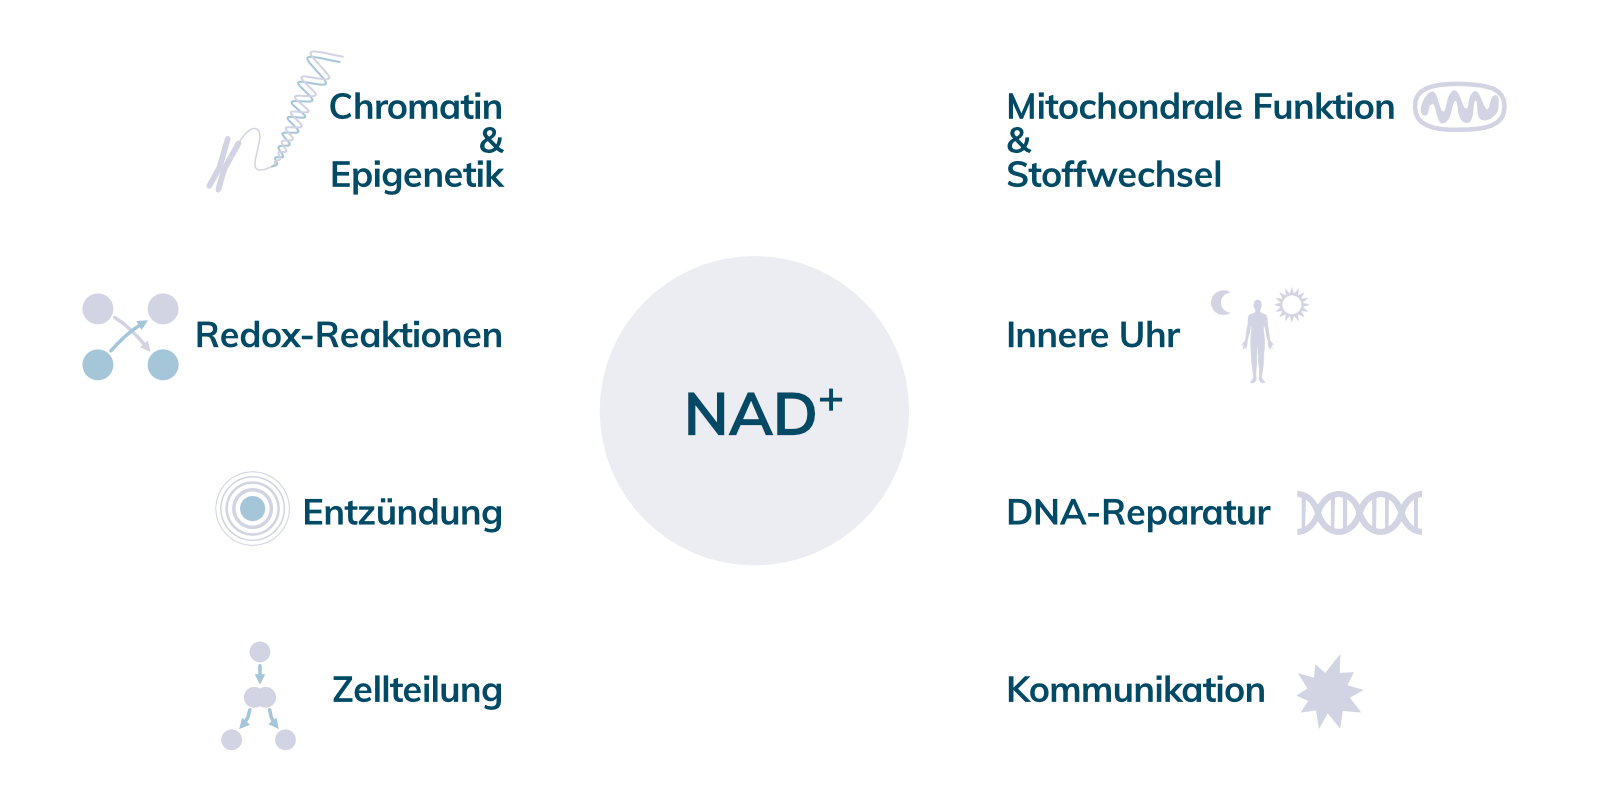 Effects and targets of NAD+ in the body